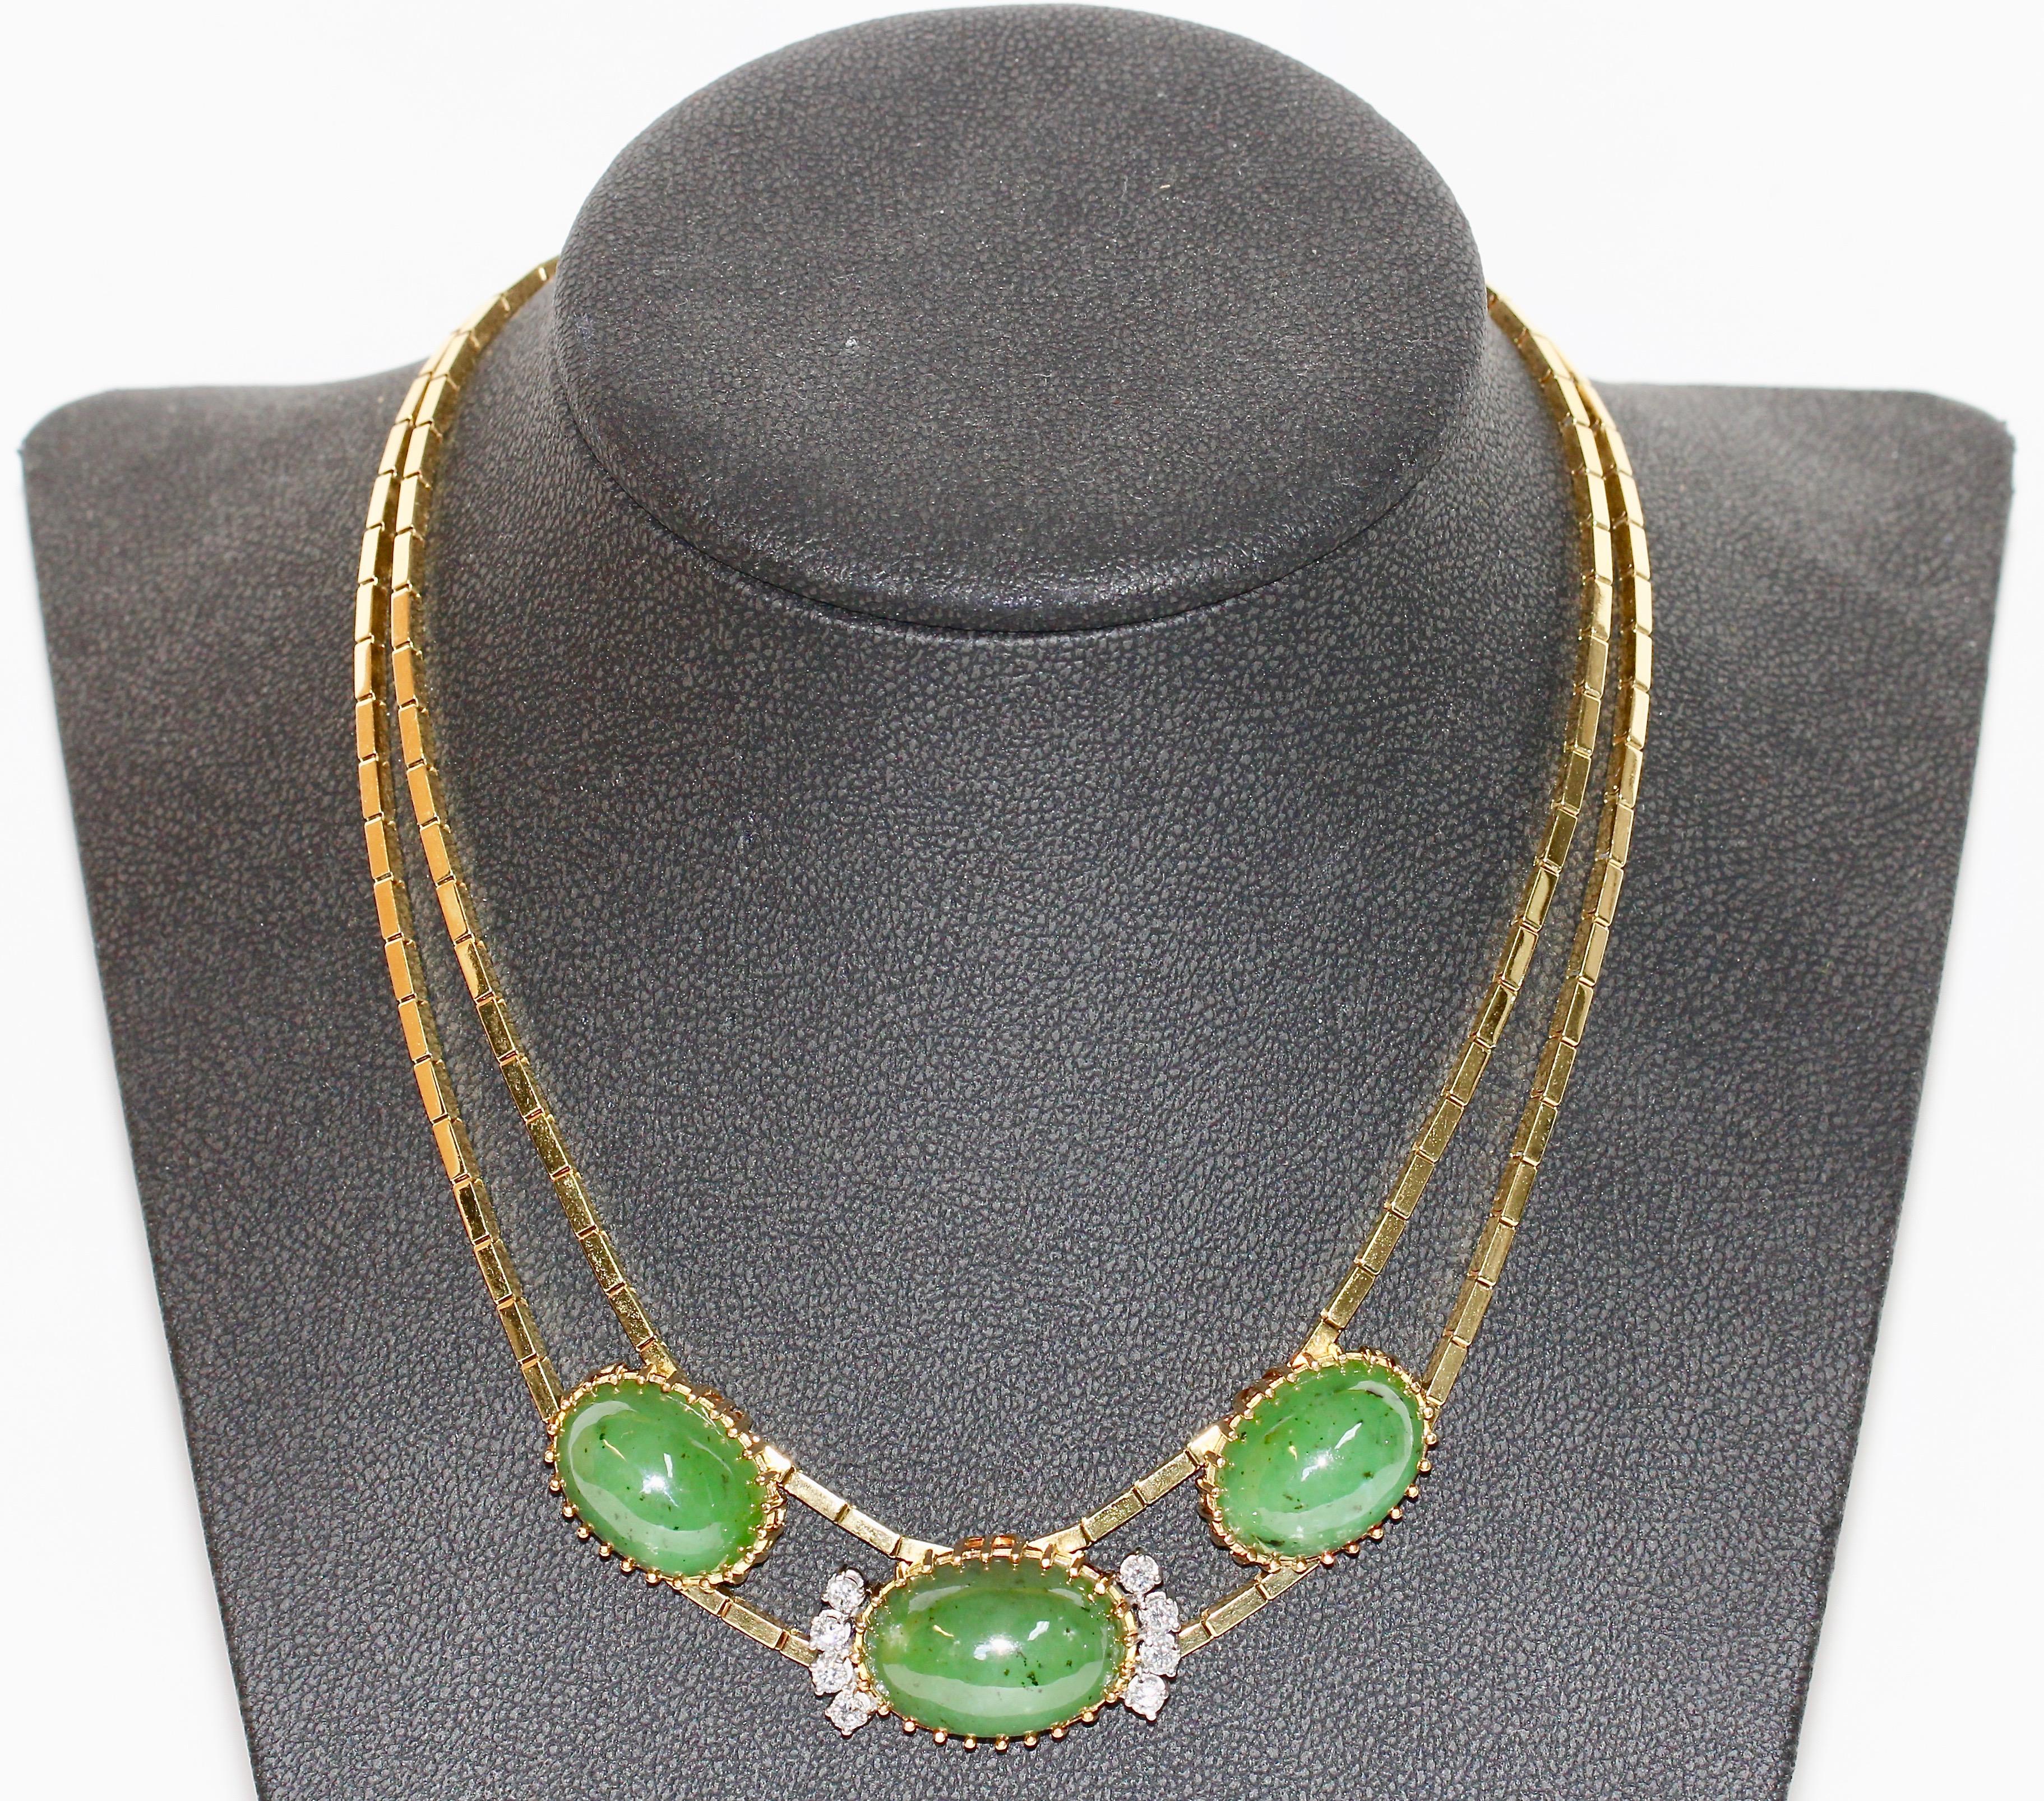 Big Jade Necklace, 18 Karat Gold with Diamonds.

The eight diamonds have a very good clarity and white color.

You will find the matching bracelet, ring and pendant in our other offers.